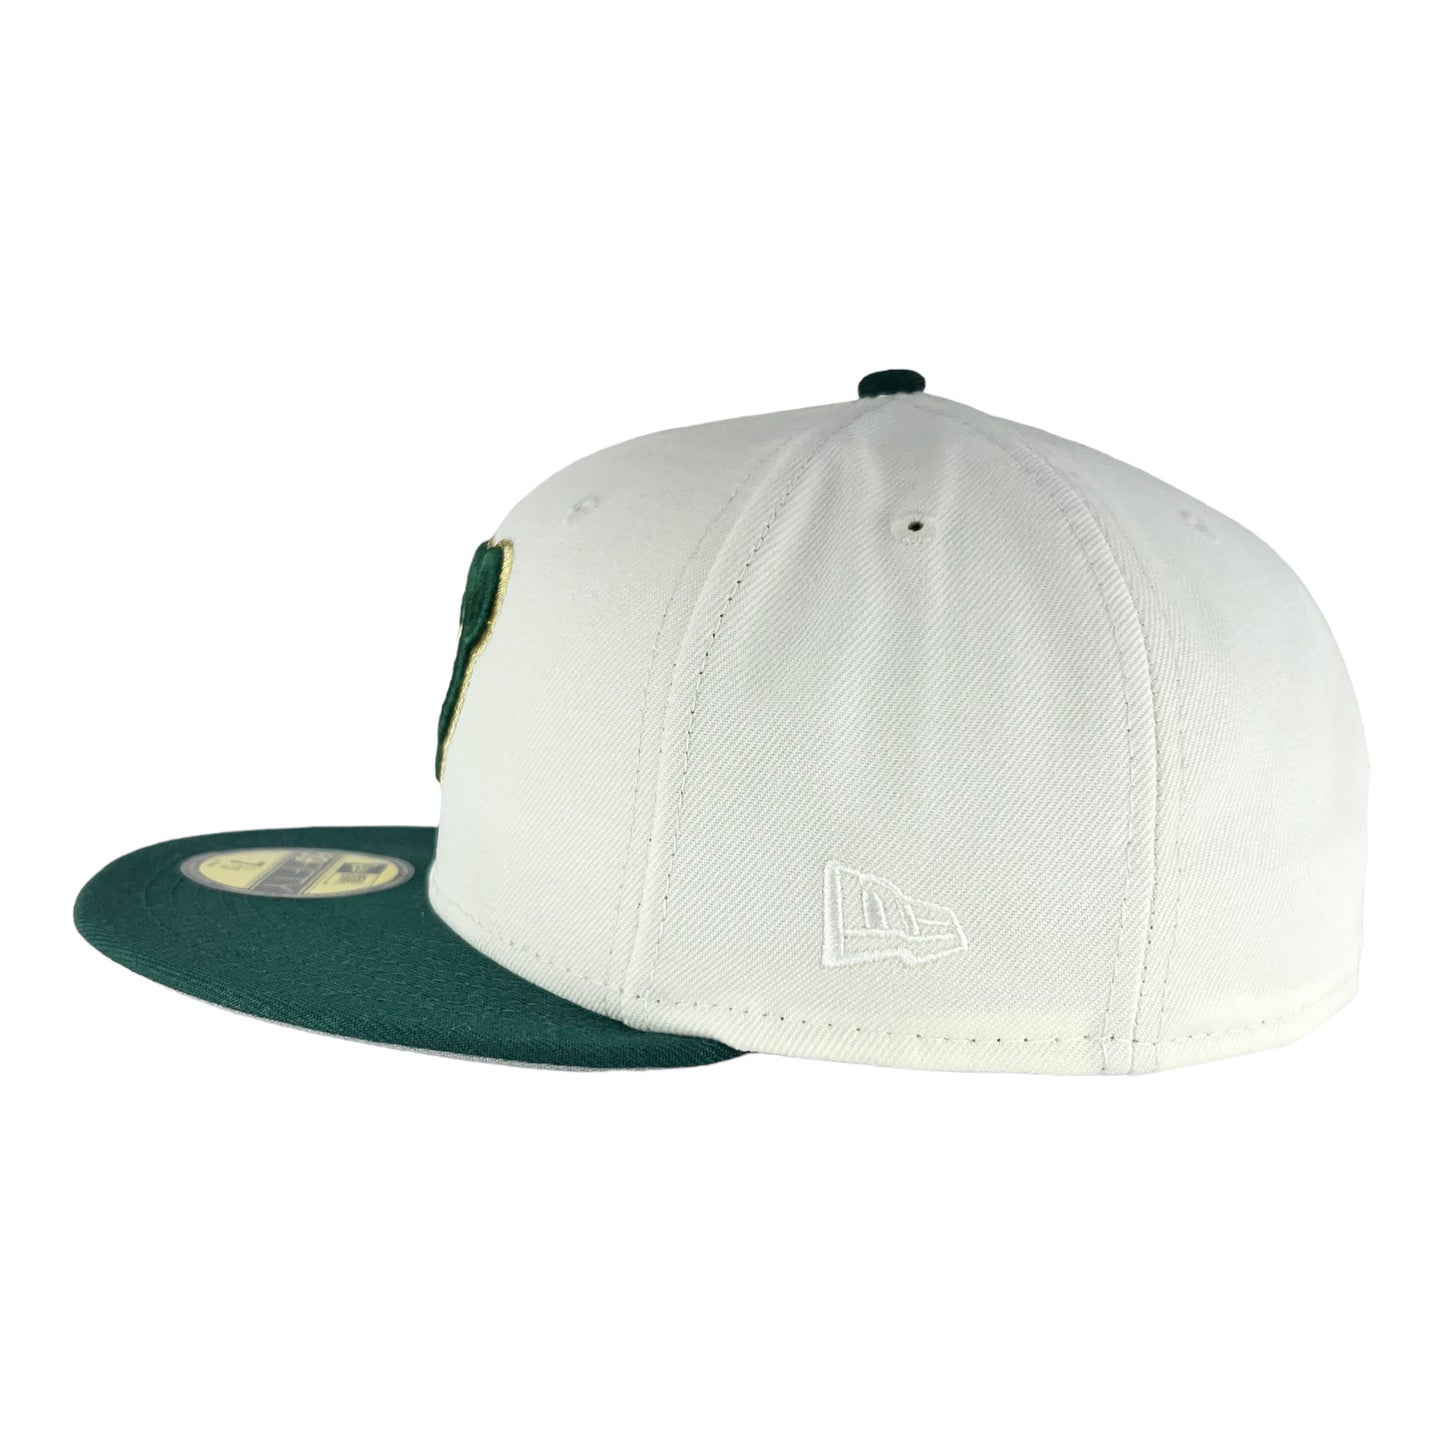 Chicago Cubs Chrome/Dark Green New Era 59FIFTY Fitted Hat